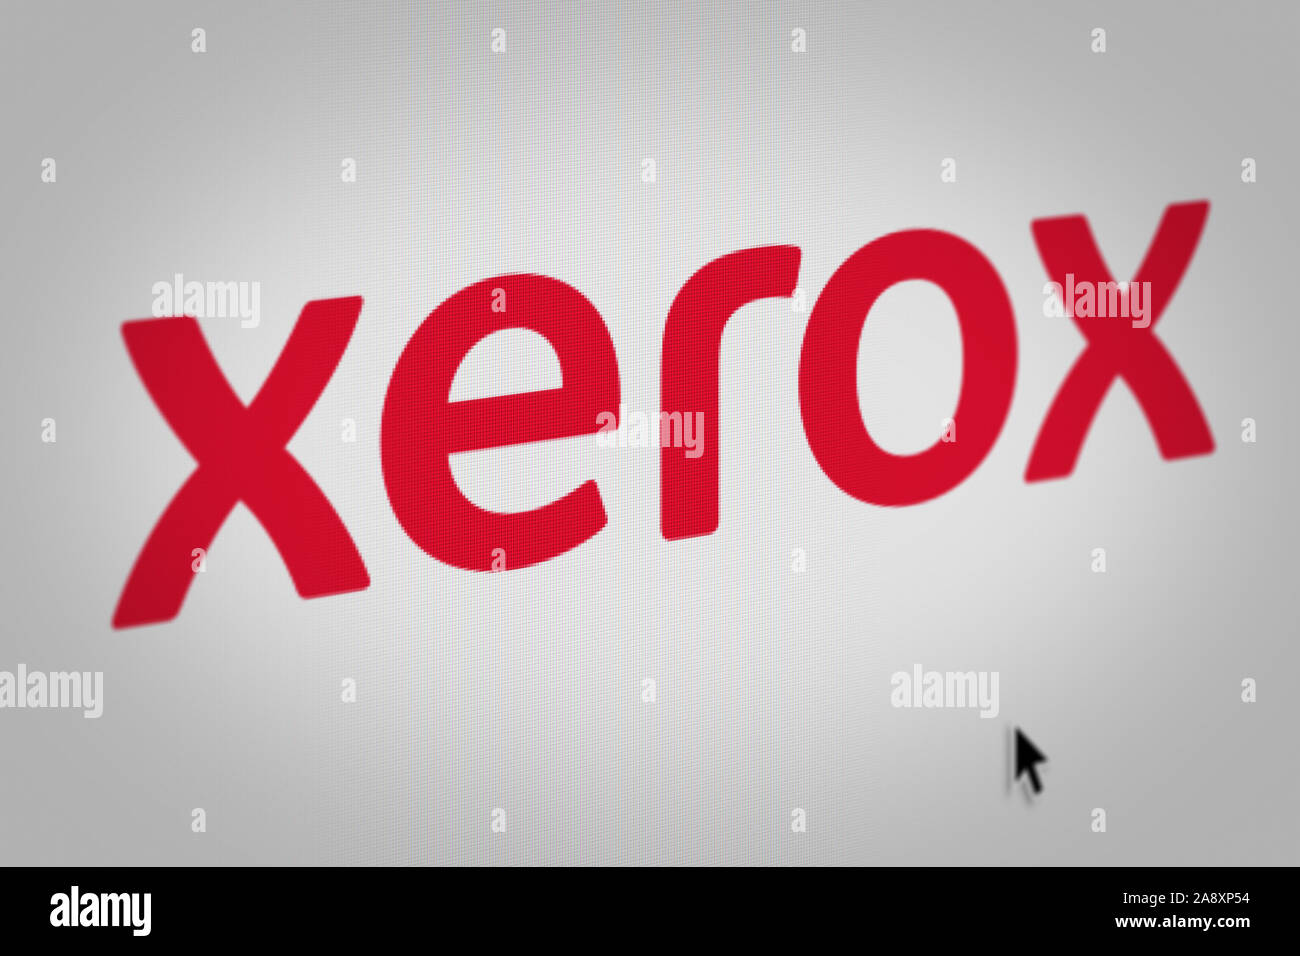 Logo of the public company Xerox displayed on a computer screen in close-up. Credit: PIXDUCE Stock Photo